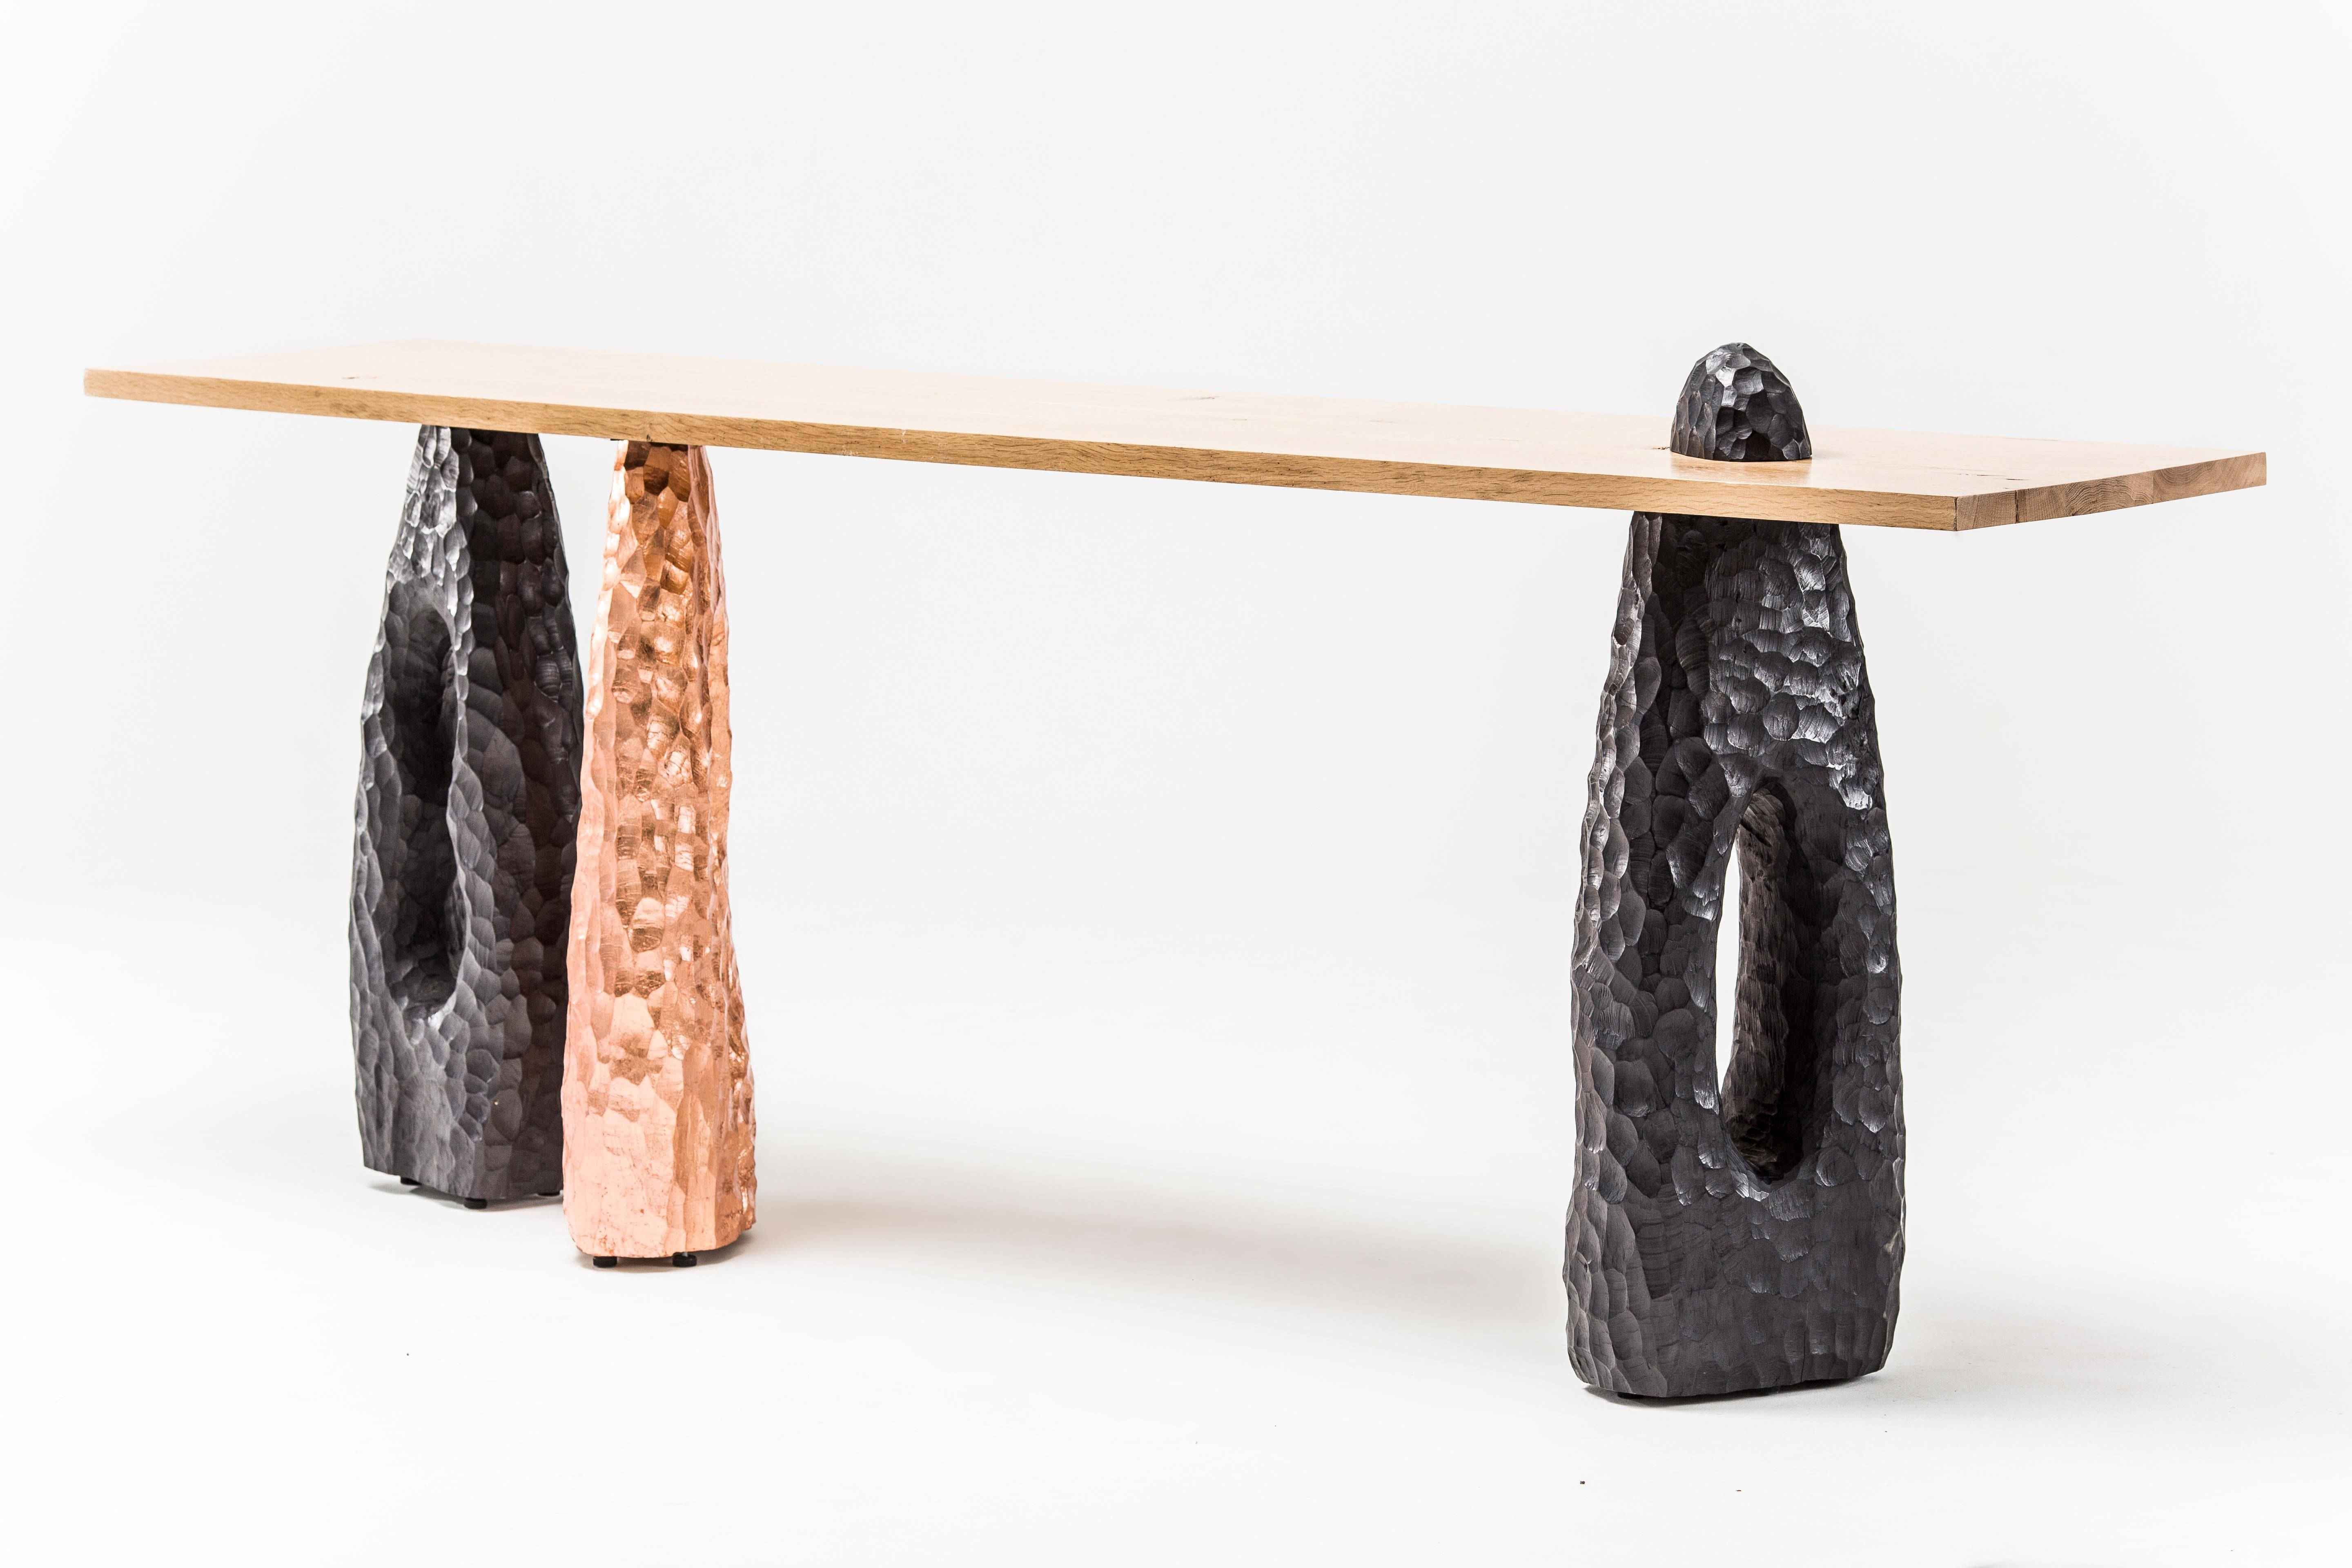 Primal Console by Egg Designs
Dimensions: 240 L X 50 D X 88 H cm
Materials: French oak top, chiselled burnished black leg, copper leaf

Founded by South Africans and life partners, Greg and Roche Dry - Egg is a unique perspective in contemporary